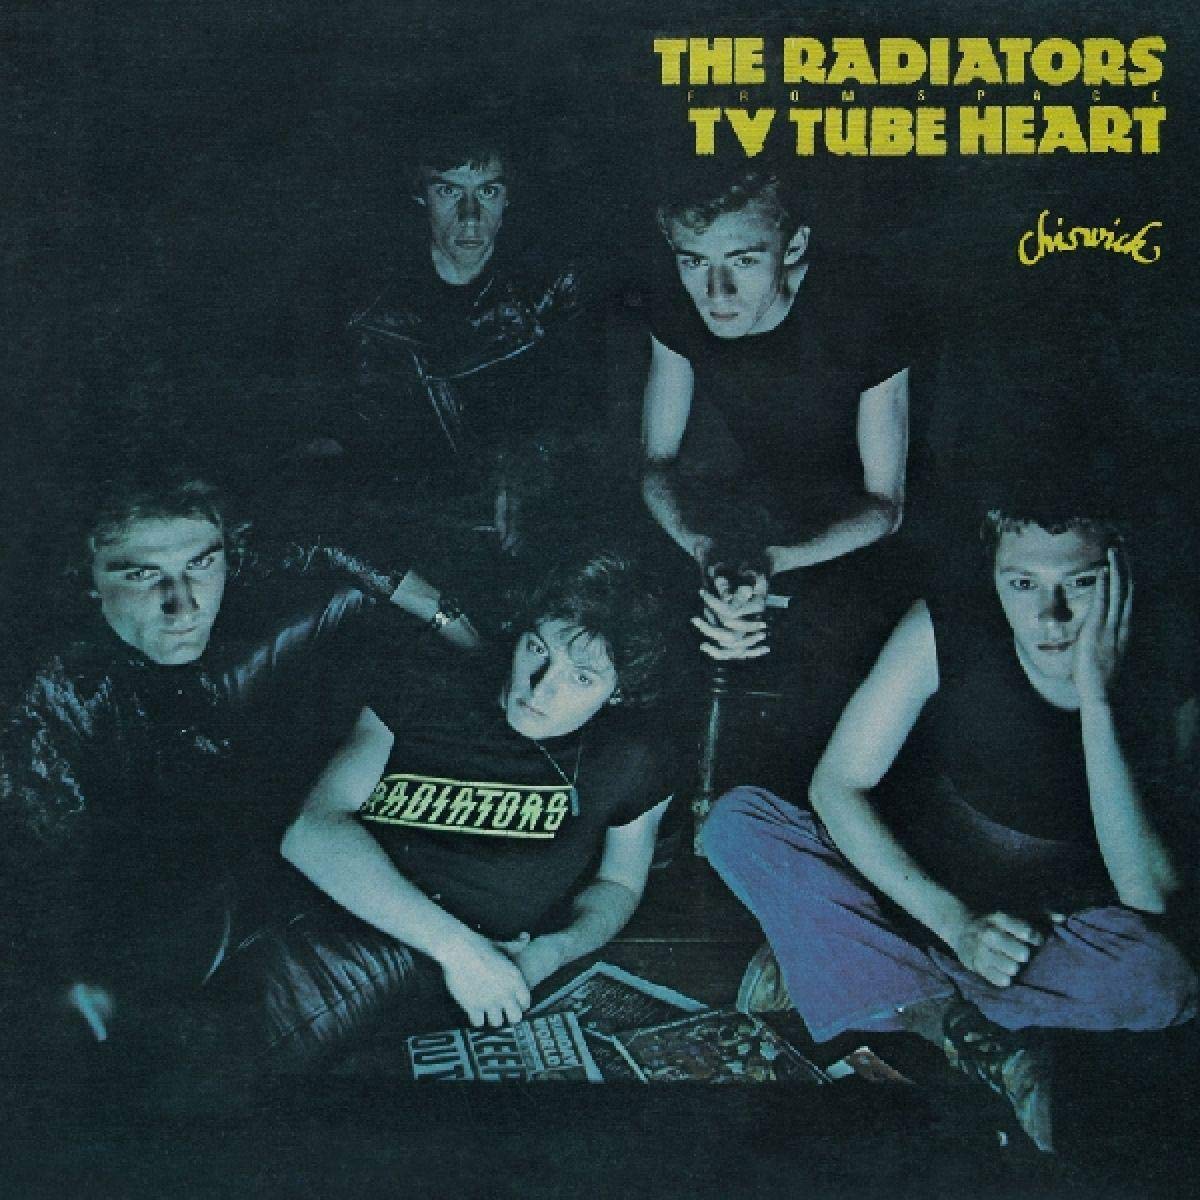 NEWS The Ignition Of Irish Punk | 43 years ago, Radiators From Space released their debut album 'TV Tube Heart'